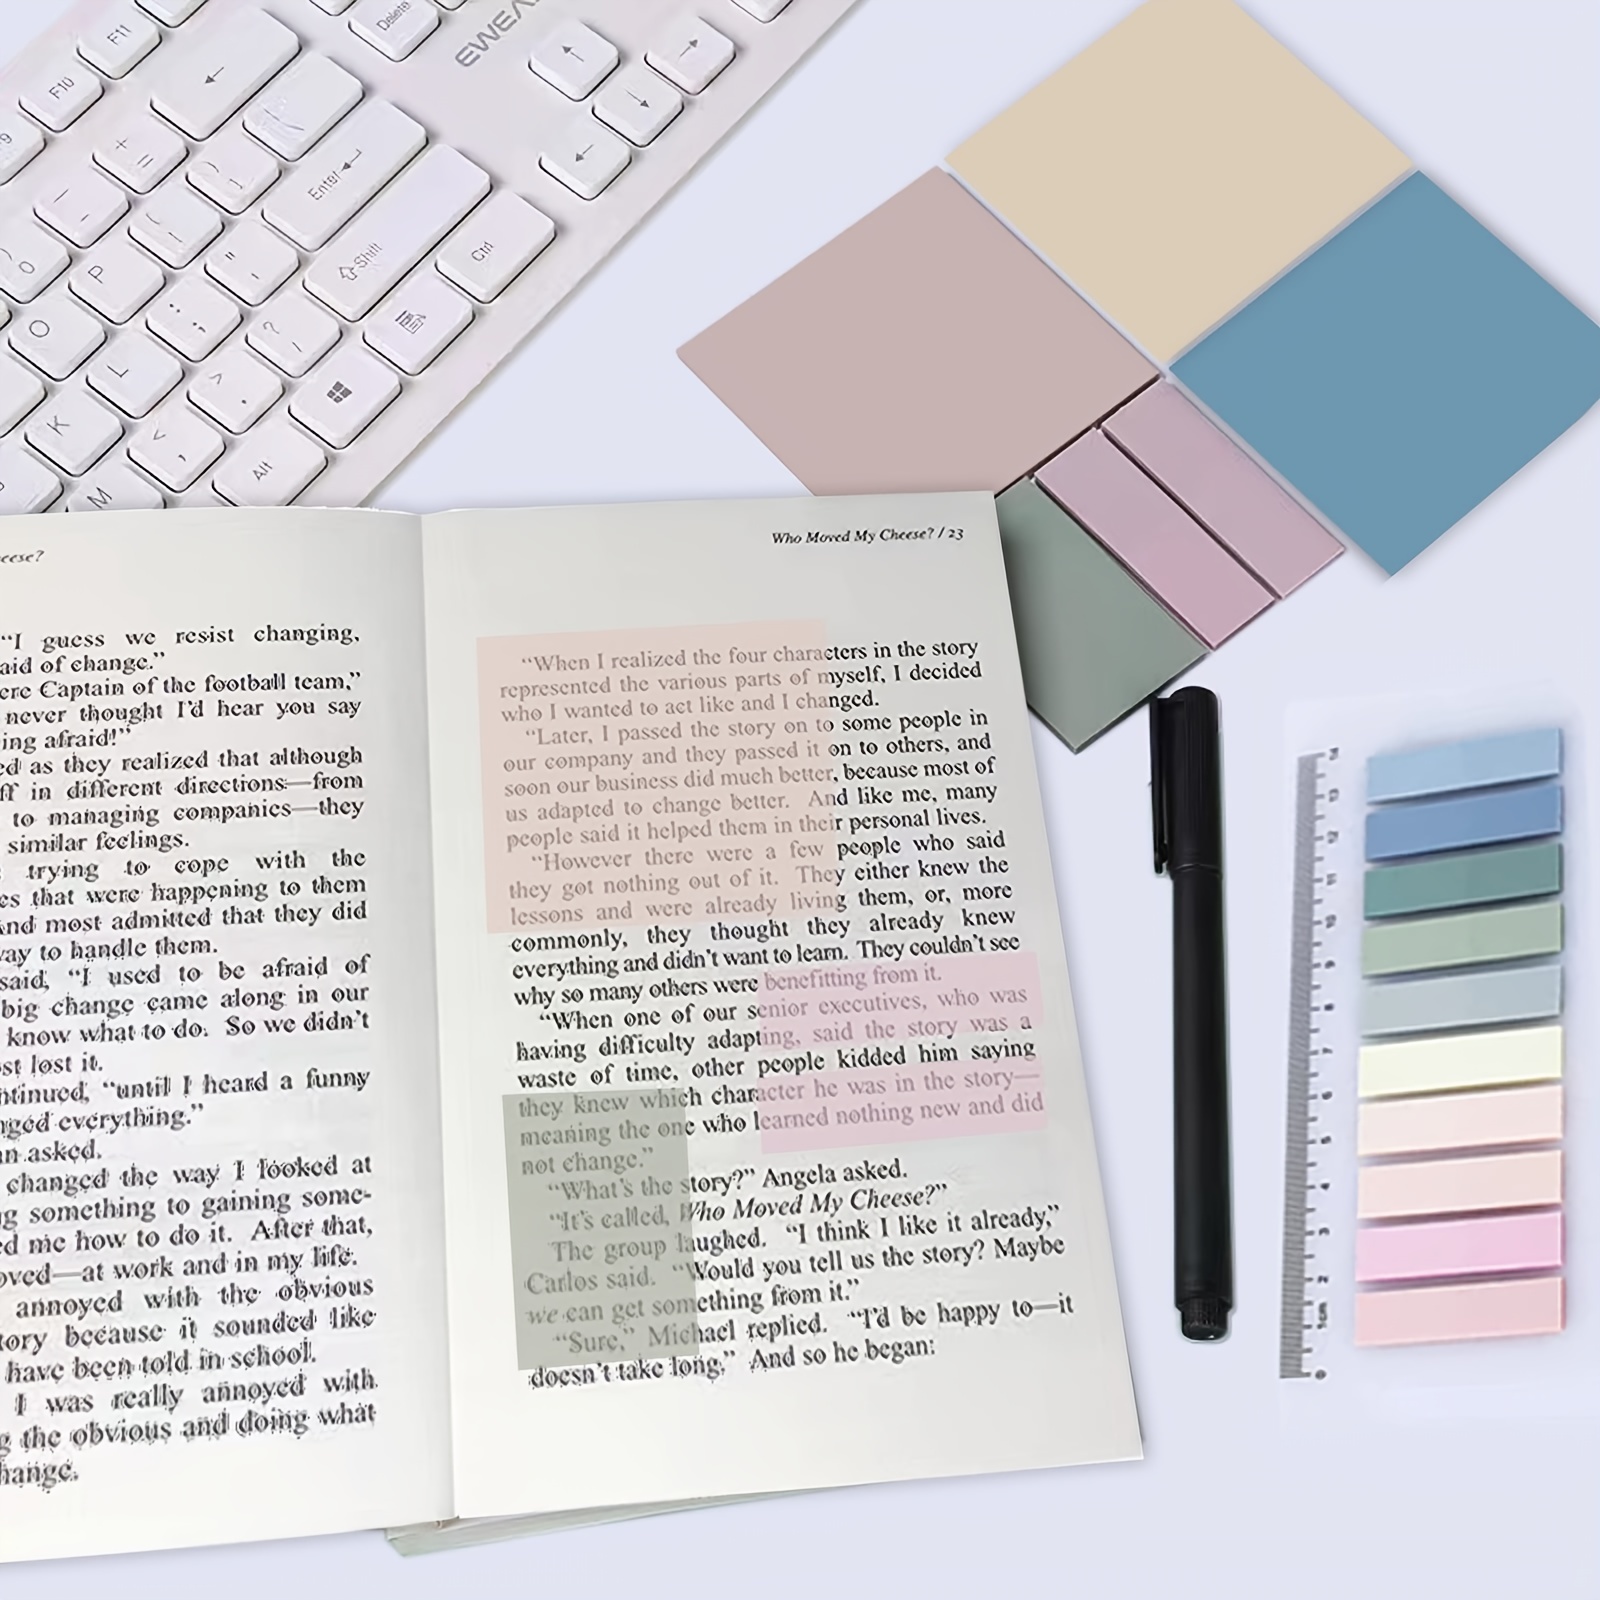 Sticky notes for book annotation.  Page marker, Markers, Sticky notes